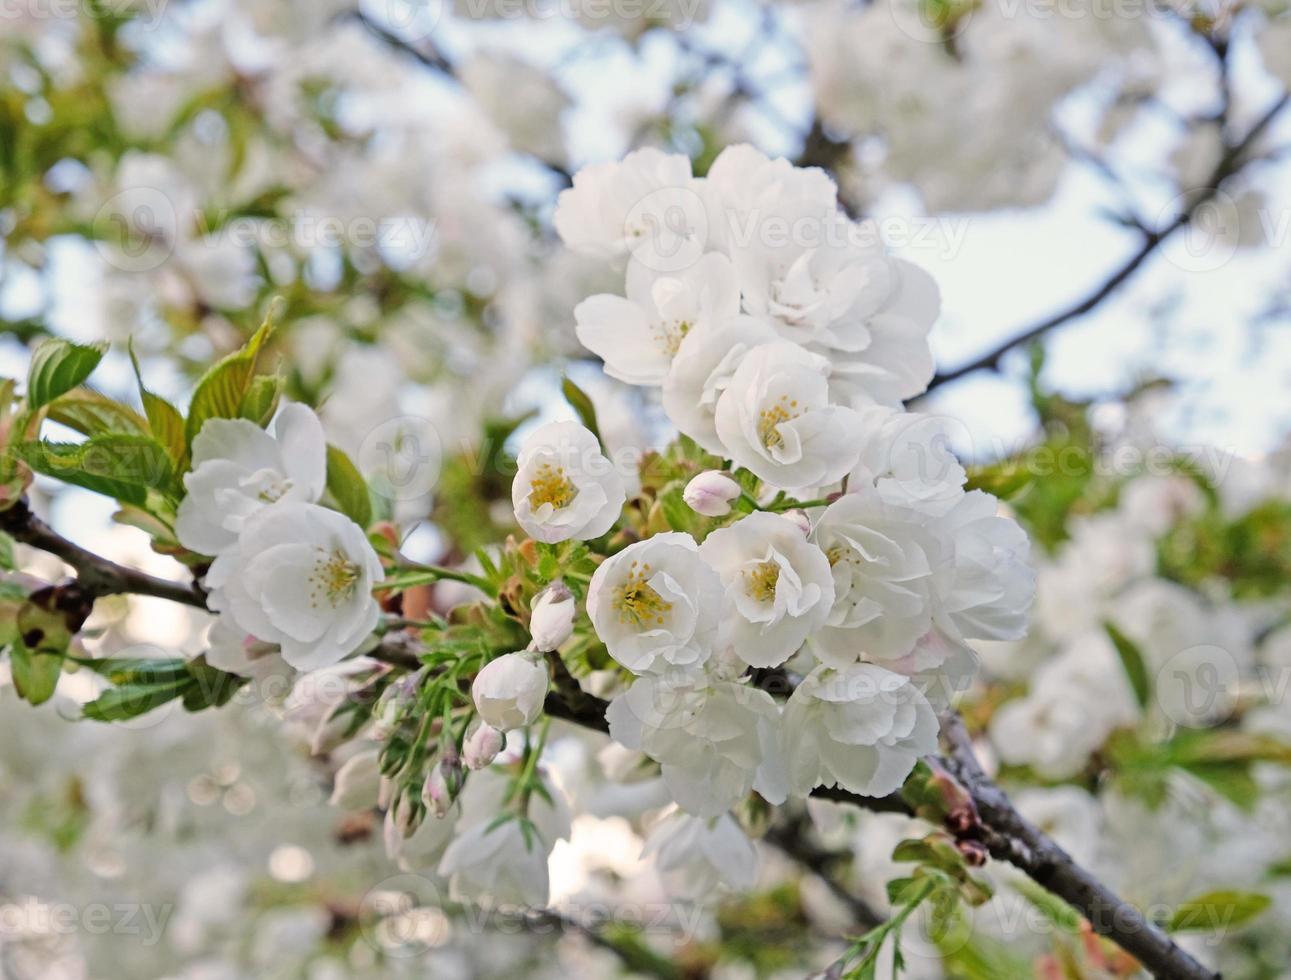 Branch of blooming white flowers of cherry plum tree in early spring. Amazing natural floral spring banner or greeting card, postcard, poster. Selective focus photo